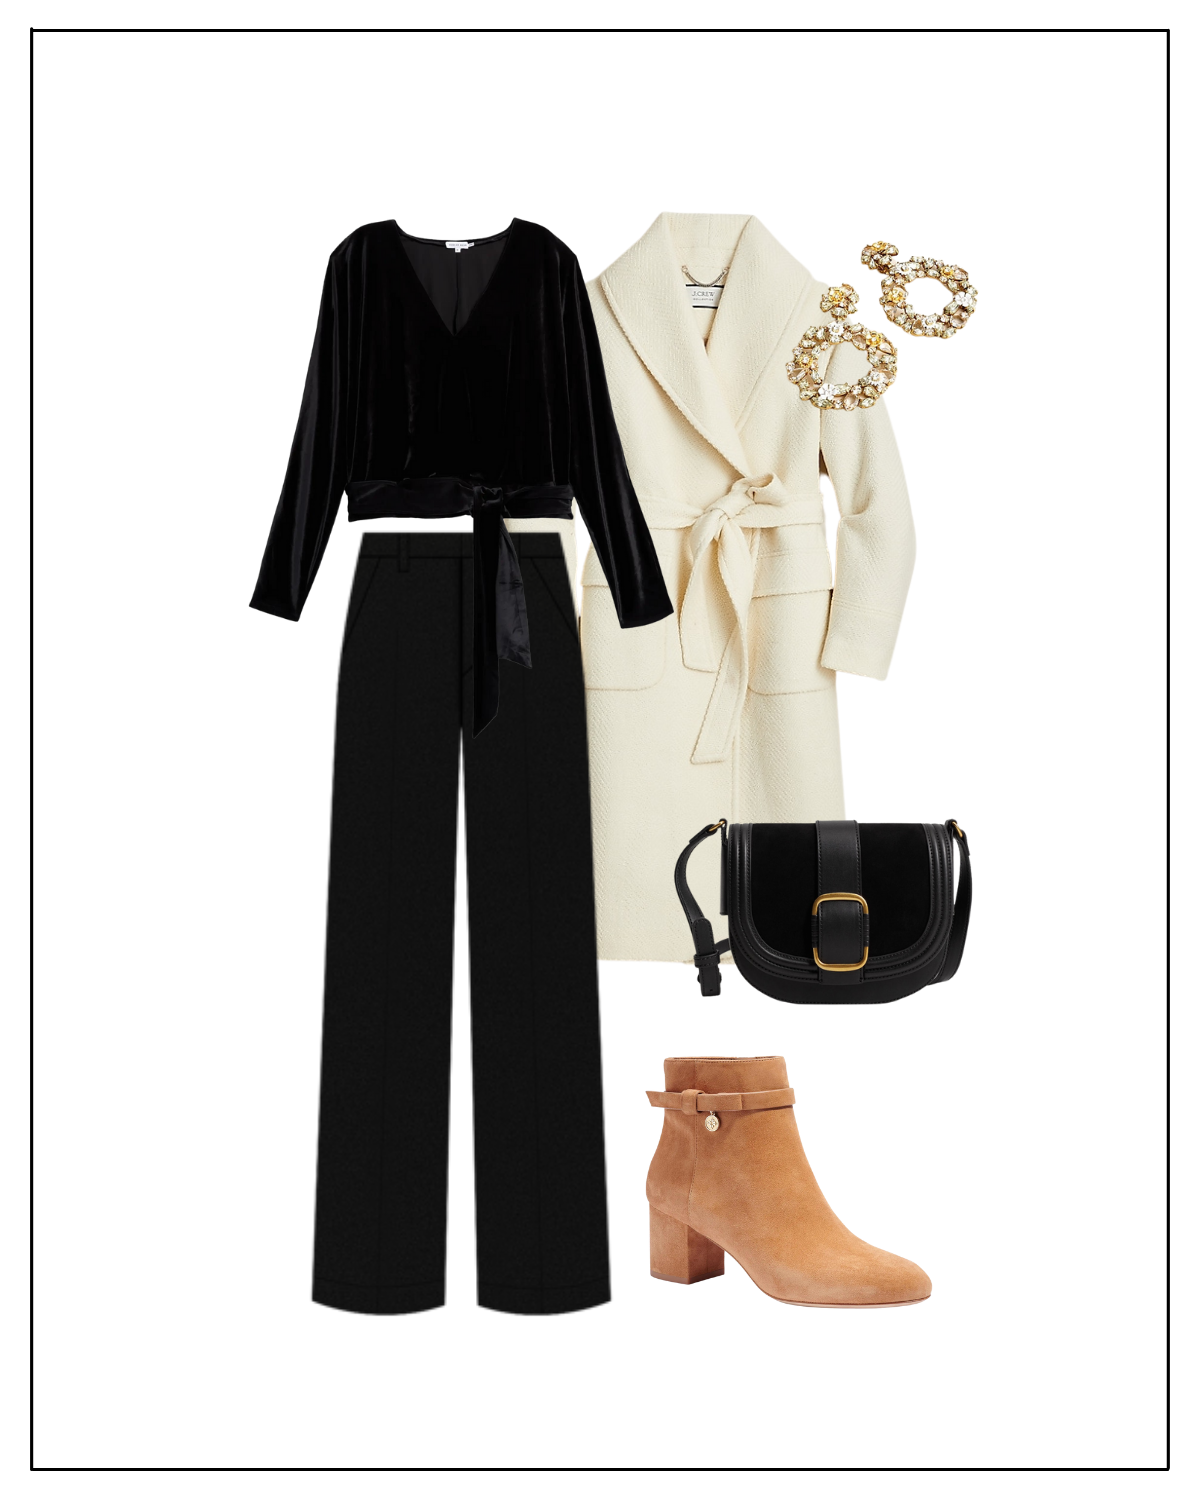 Three Easy New Year’s Eve Looks - chic black winter outfit